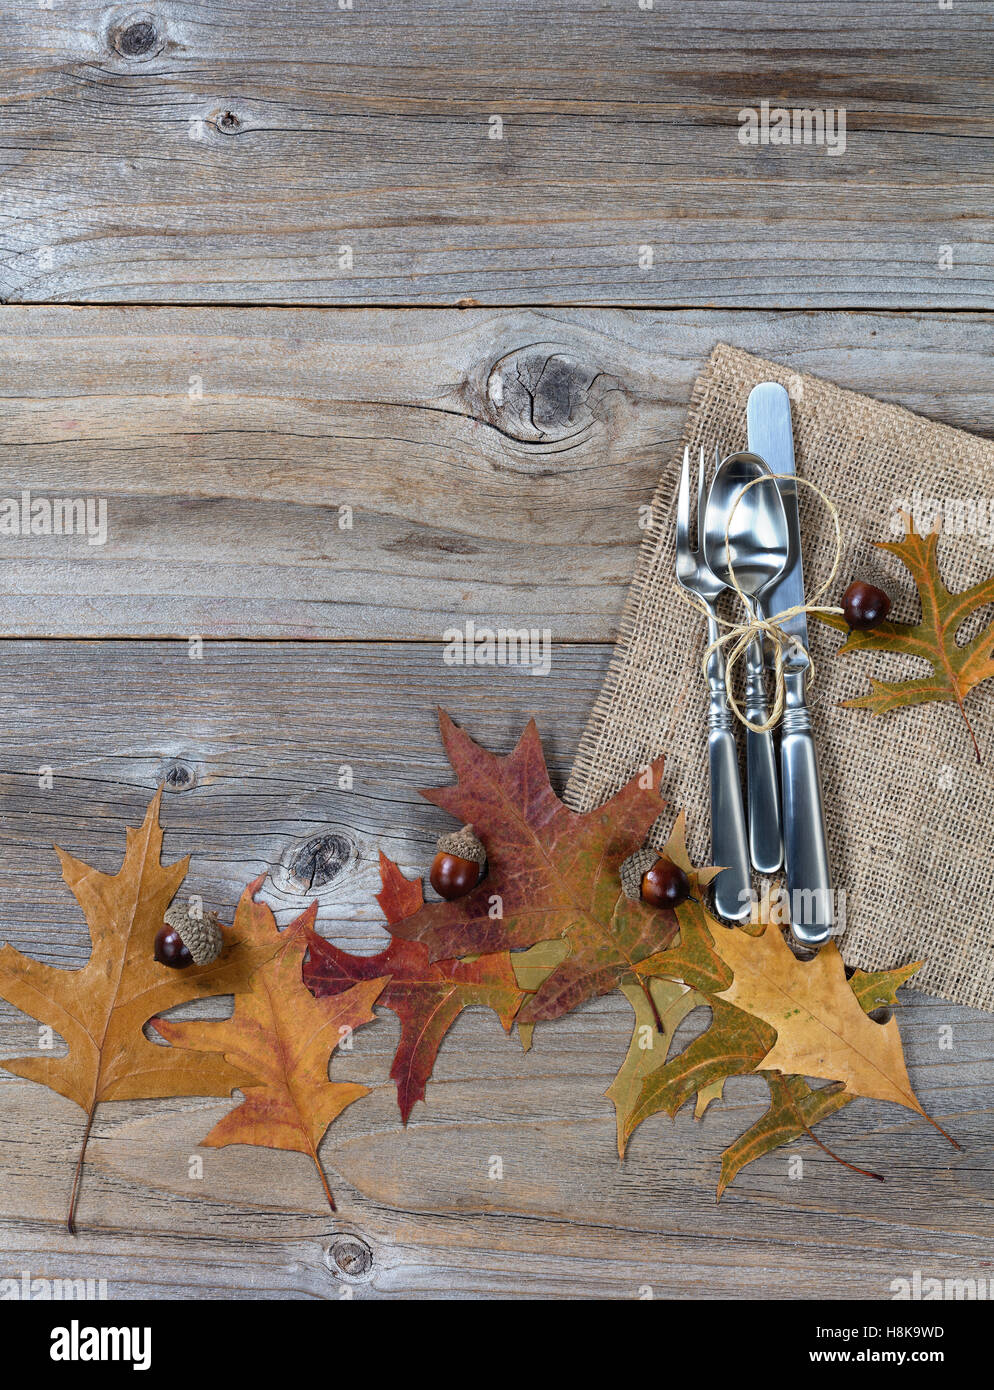 Autumn dinner place setting for Thanksgiving holiday in vertical layout on rustic wooden boards. Stock Photo